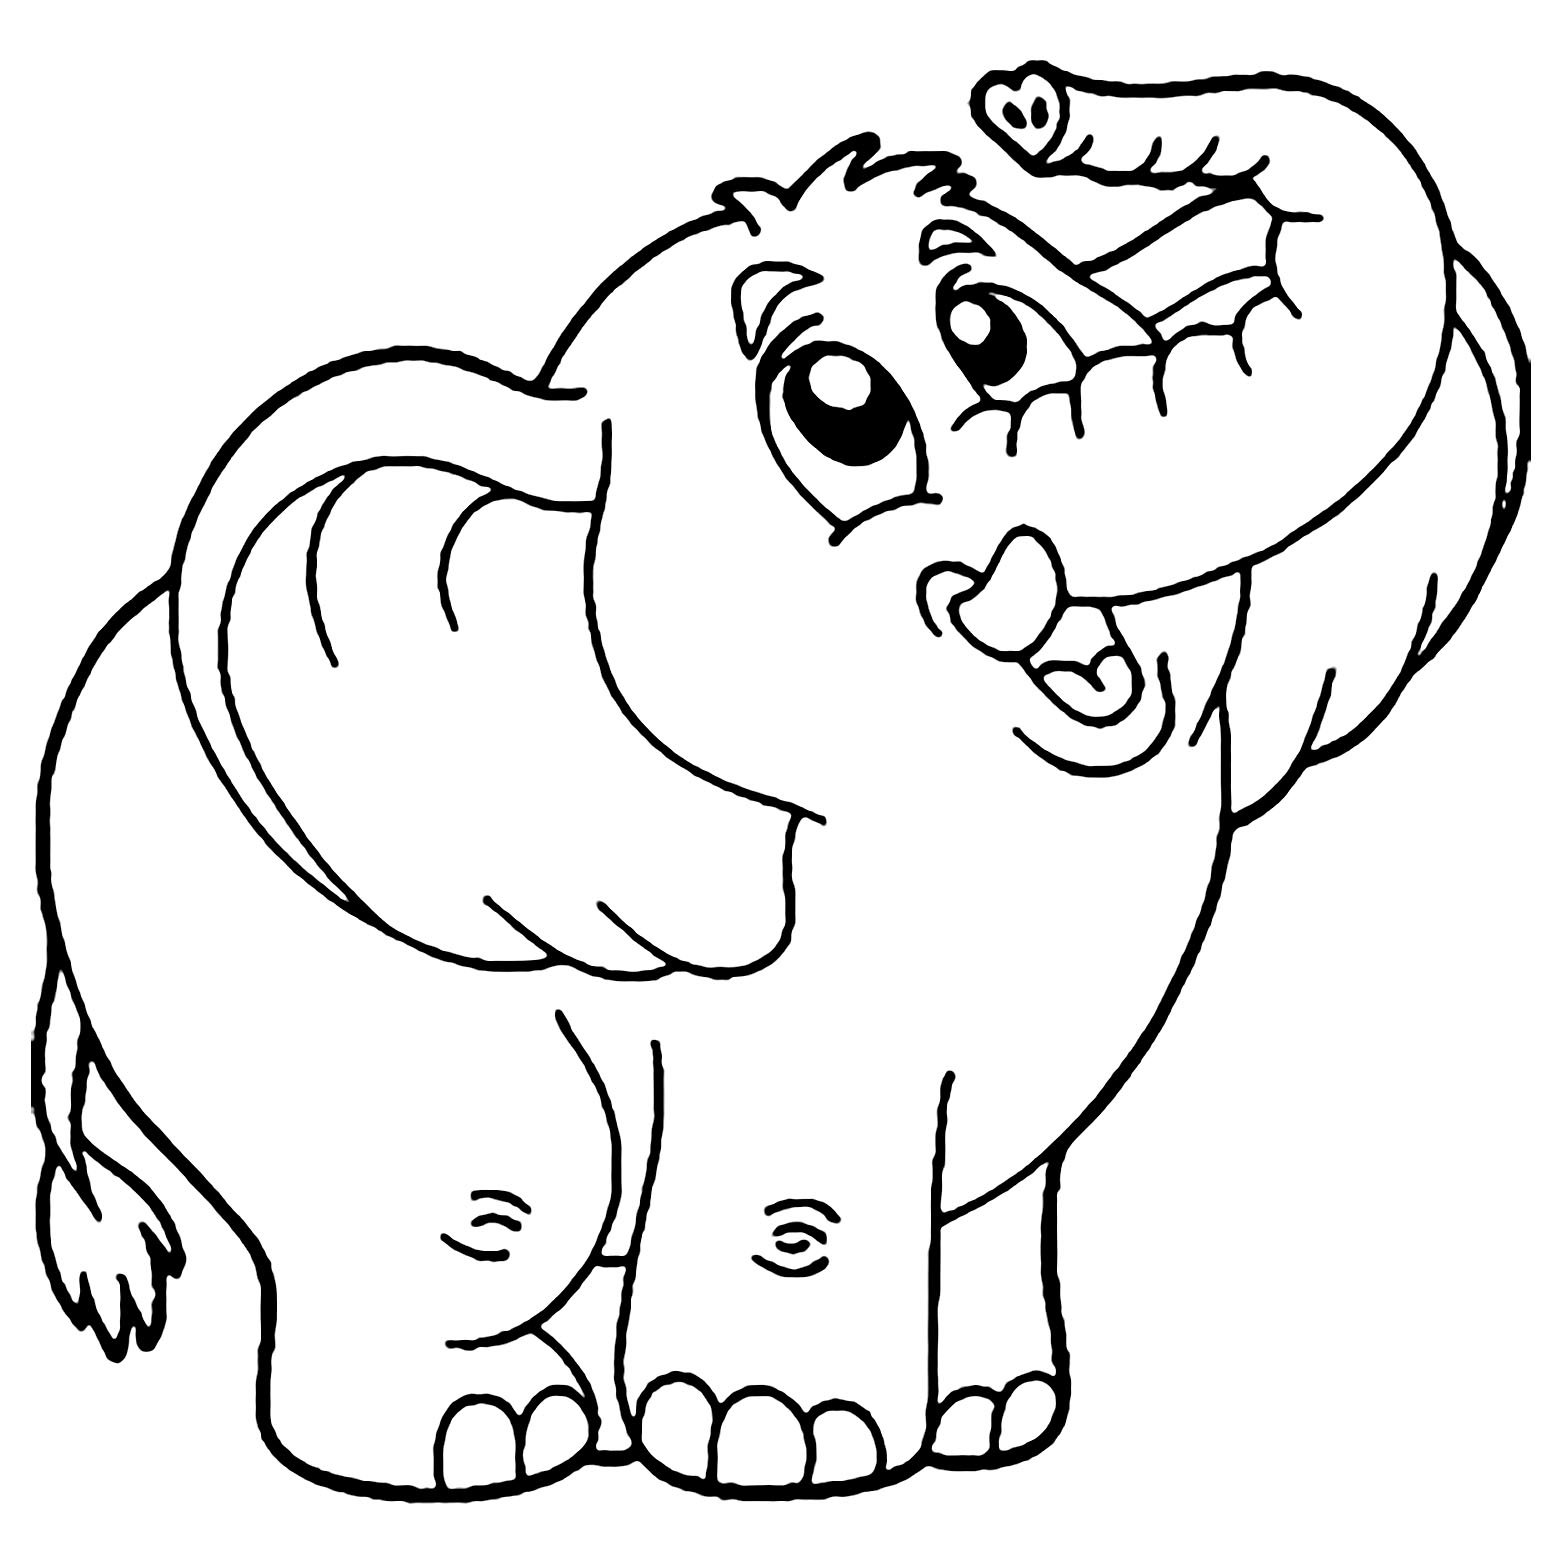 Coloring Pages For Kids Elephant : Color this friendly elephant with